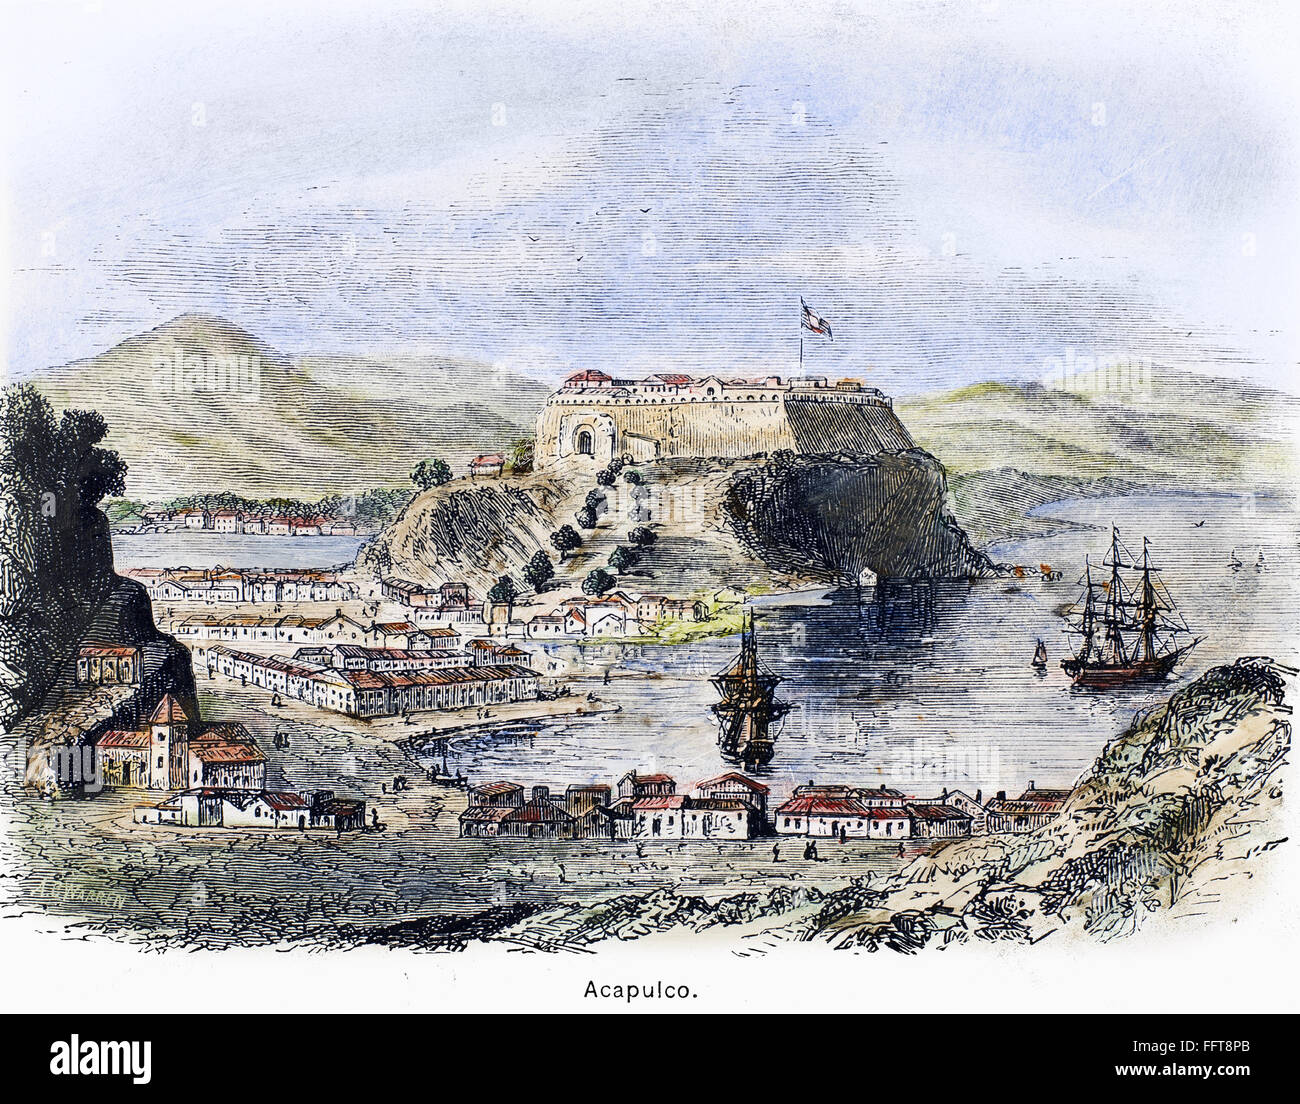 MEXICO: ACAPULCO. /nView of the city of Acapulco, Mexico. Wood engraving, 19th century. Stock Photo